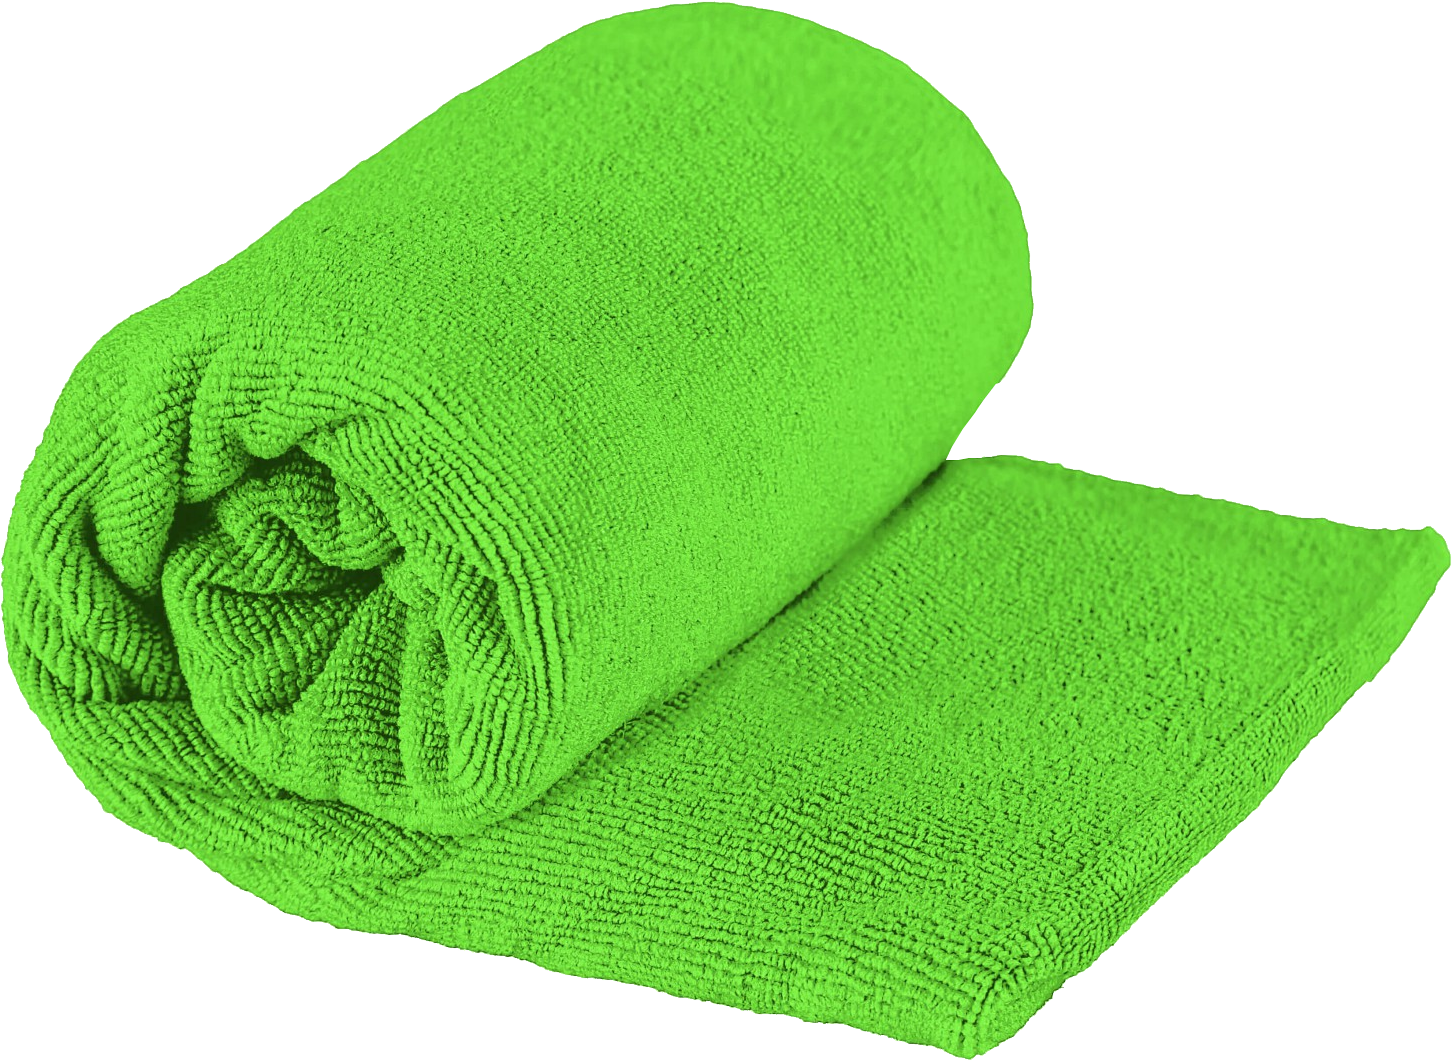 Towel PNG images free download